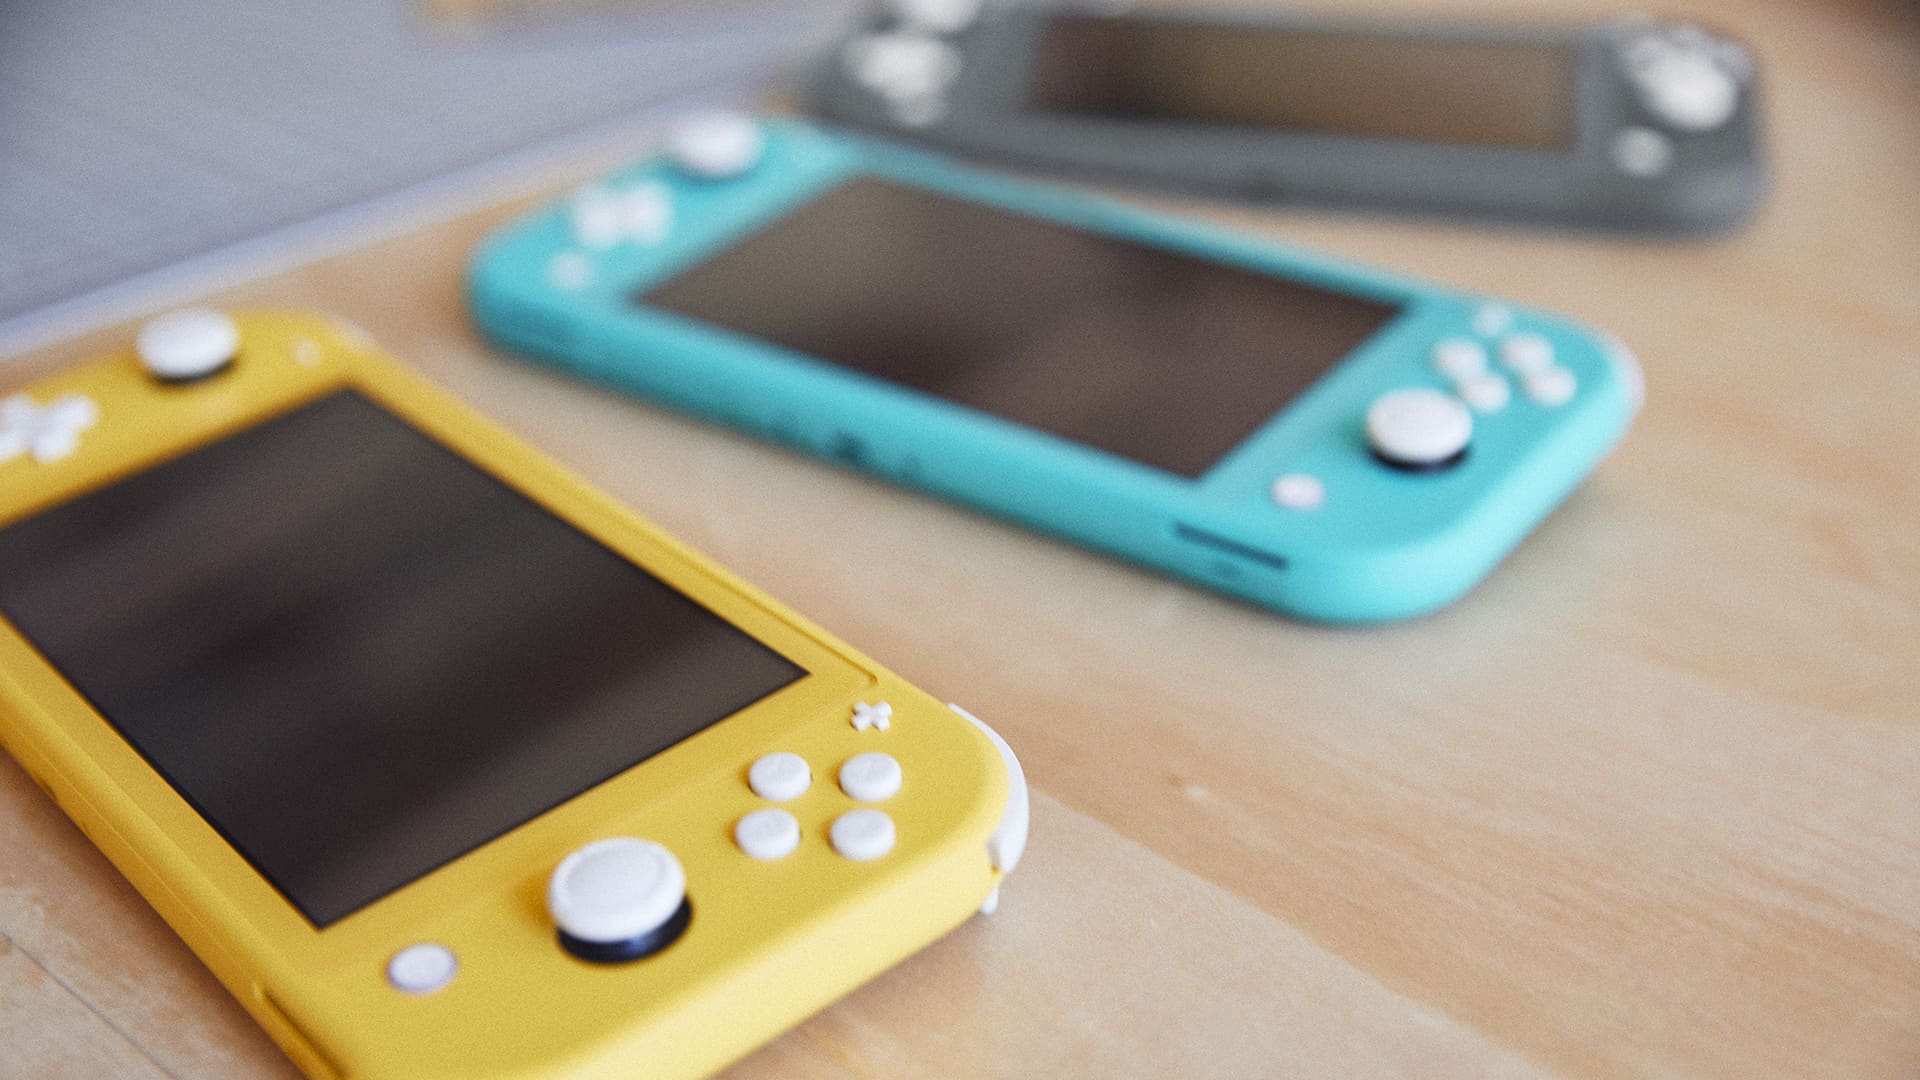 having a switch and switch lite